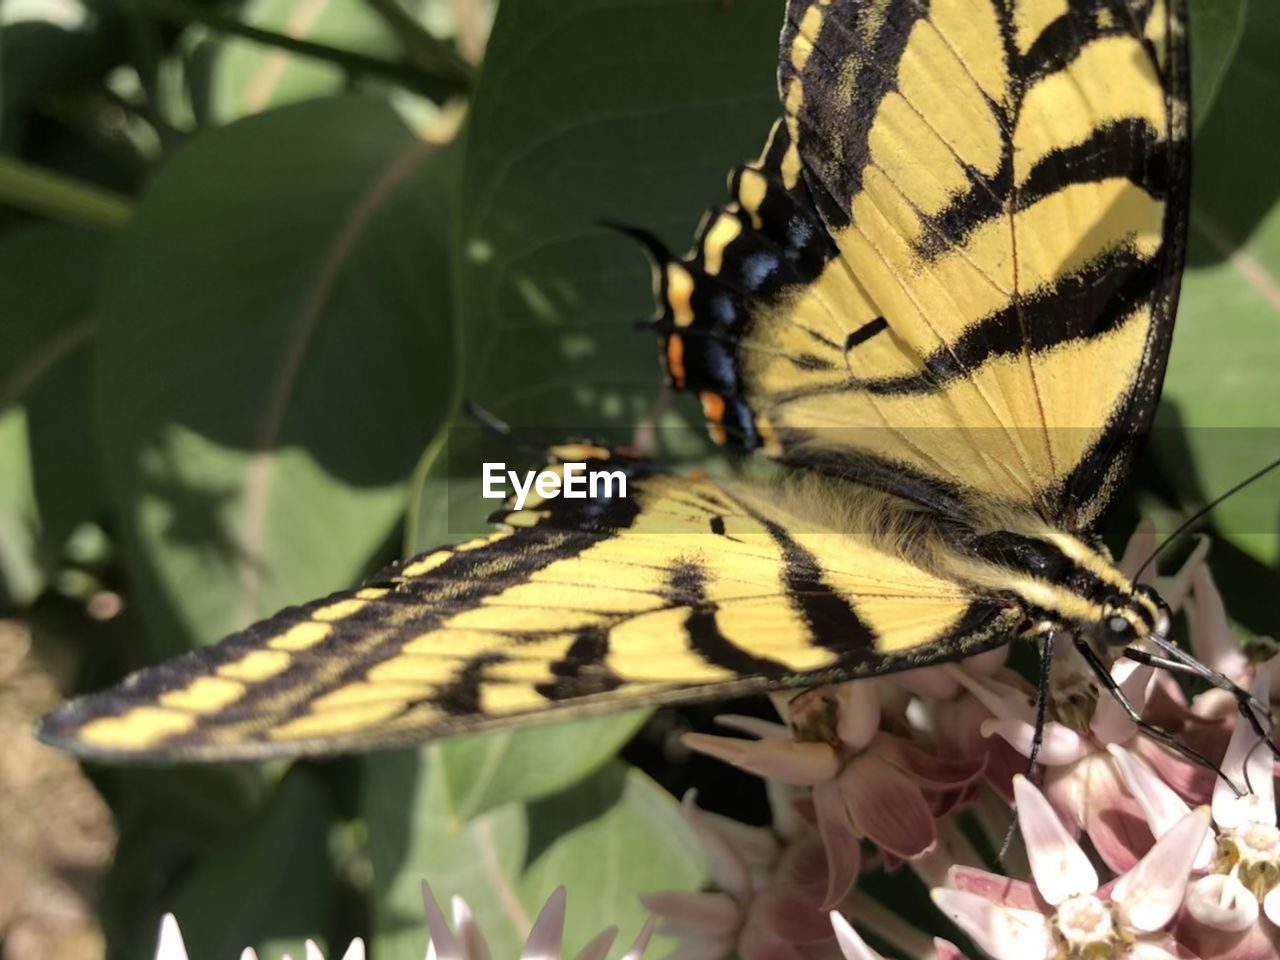 Western tiger swallowtail feeds on flowers